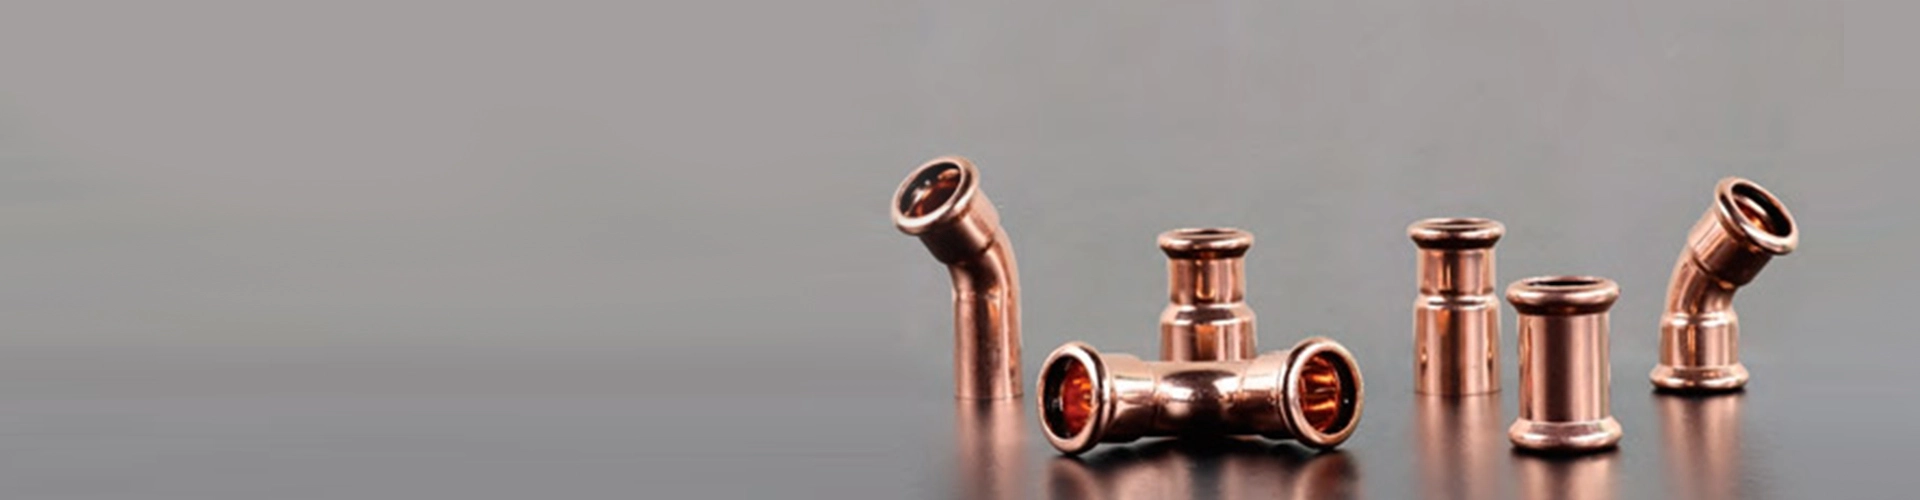 Applications of AC Copper Fittings in Diverse Cooling Systems